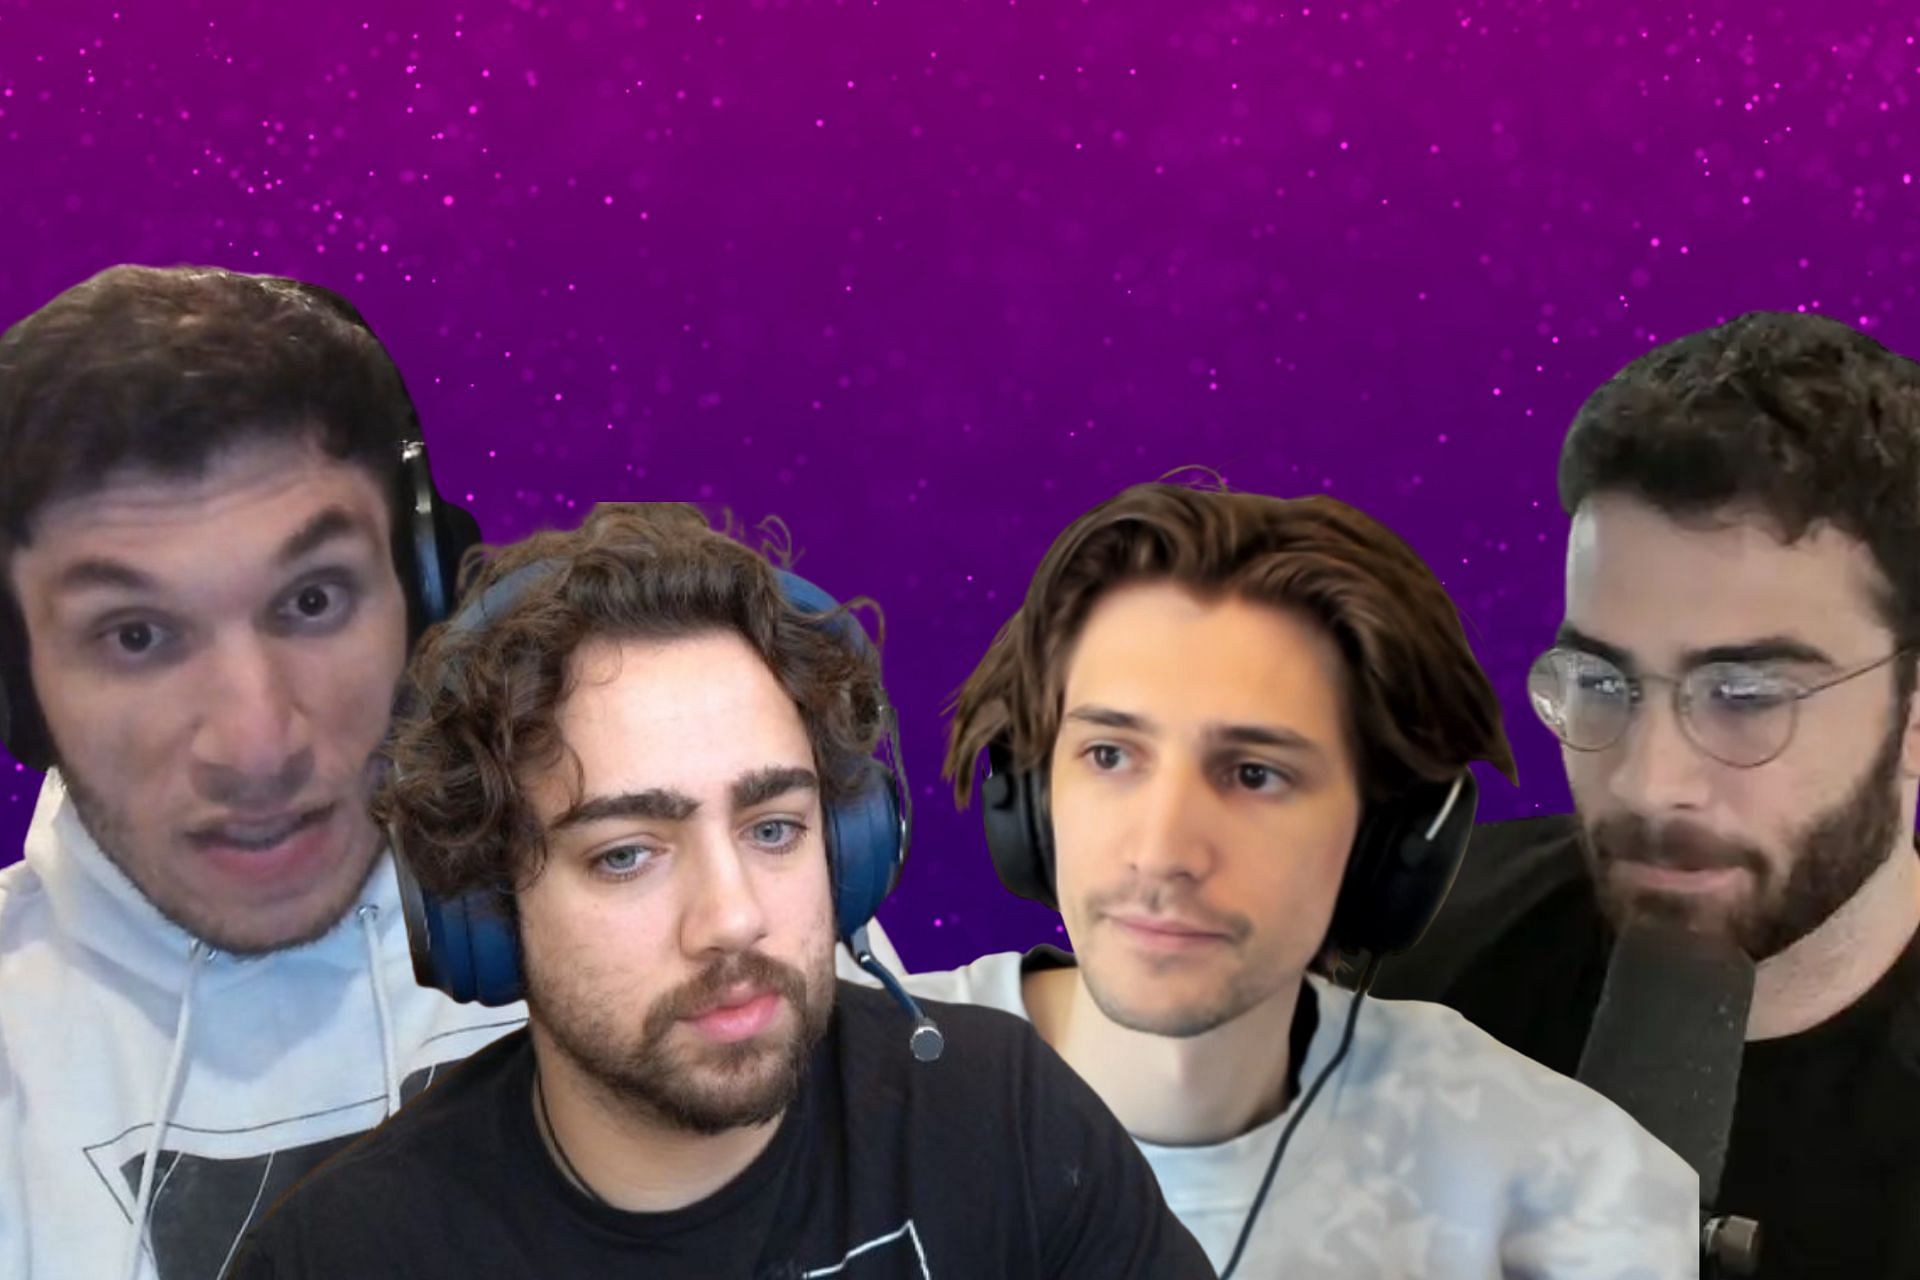 TwitchCon 2022: TommyInnit calls out JiDion for allegedly harrassing his  fans at TwitchCon